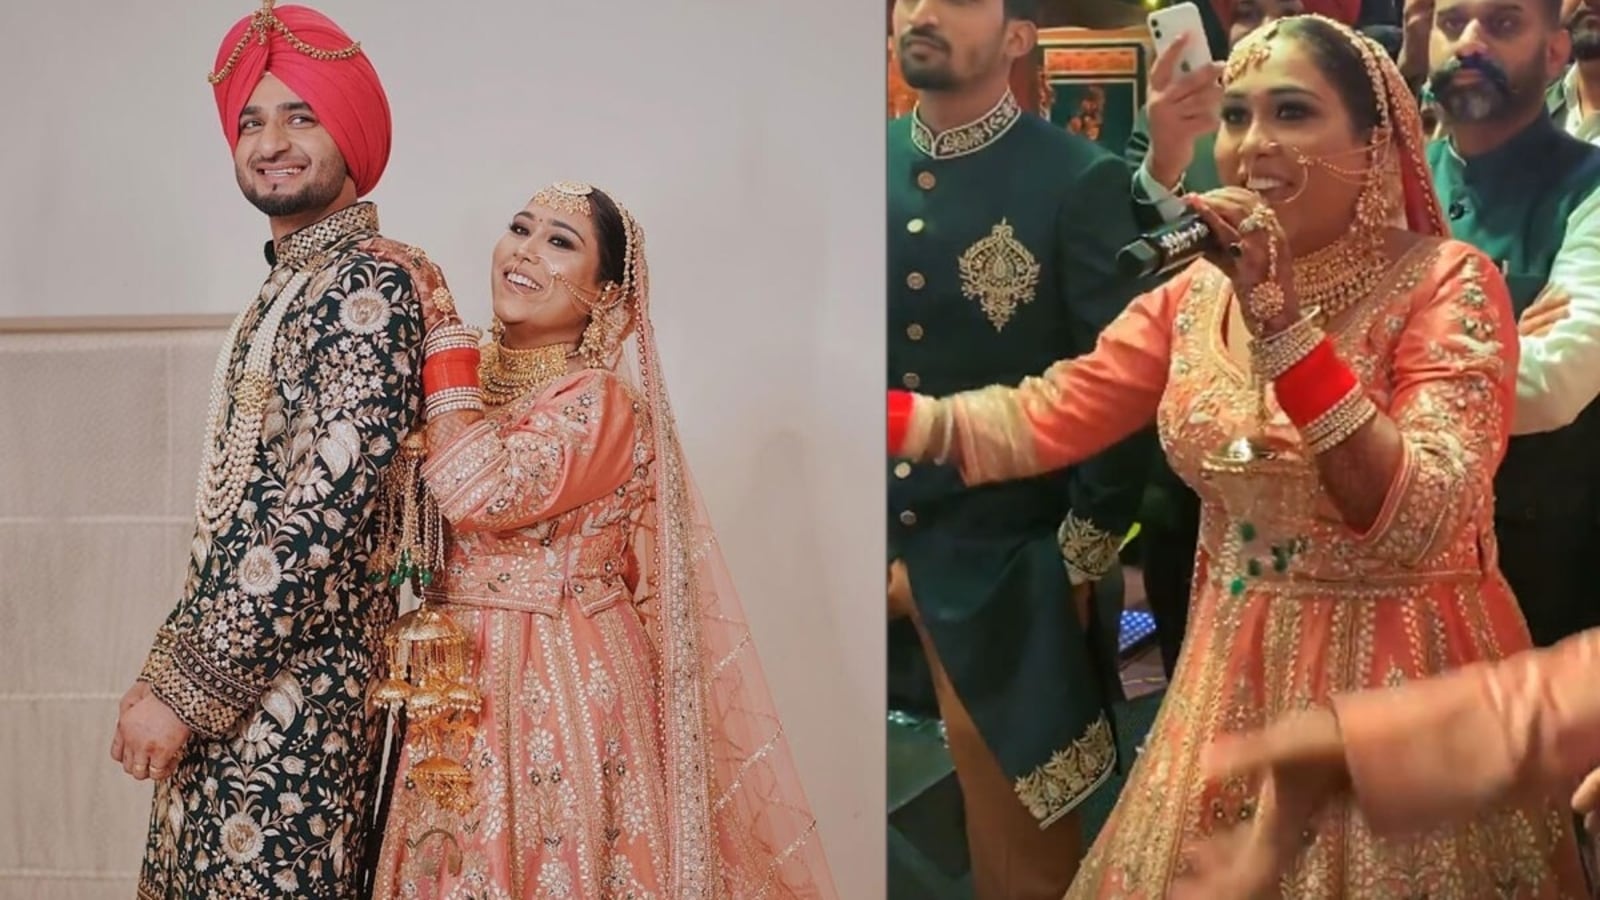 Afsana Xxnxx Hd - Afsana Khan ties the knot with Saajz, sings and grooves at the wedding -  Hindustan Times